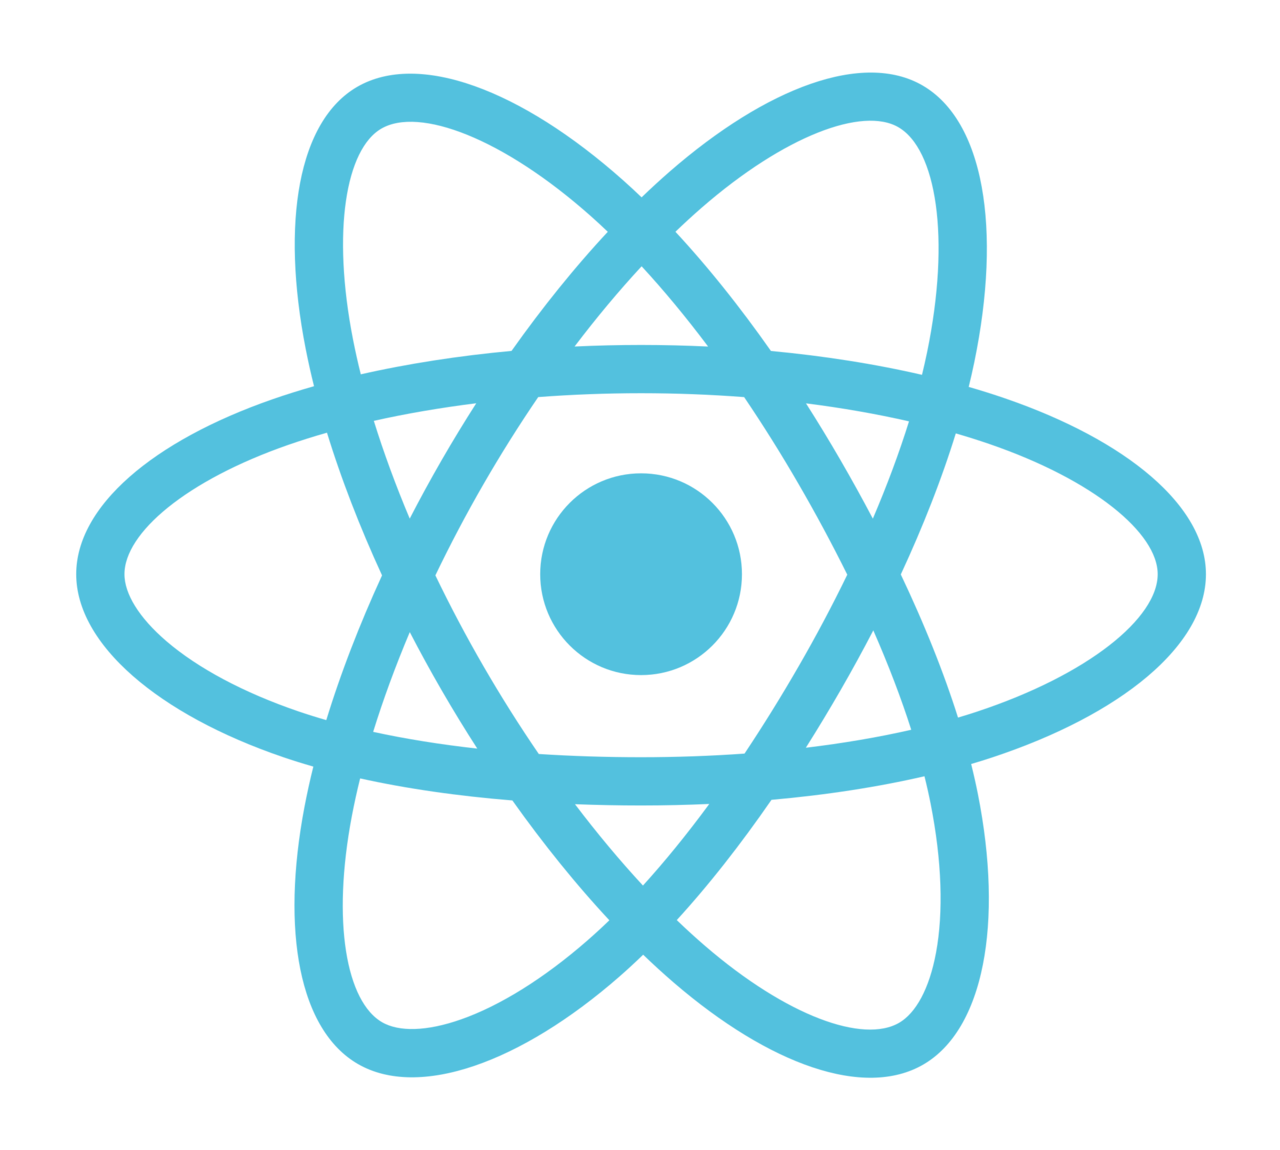 read more about React and completed courses relevant to that skill